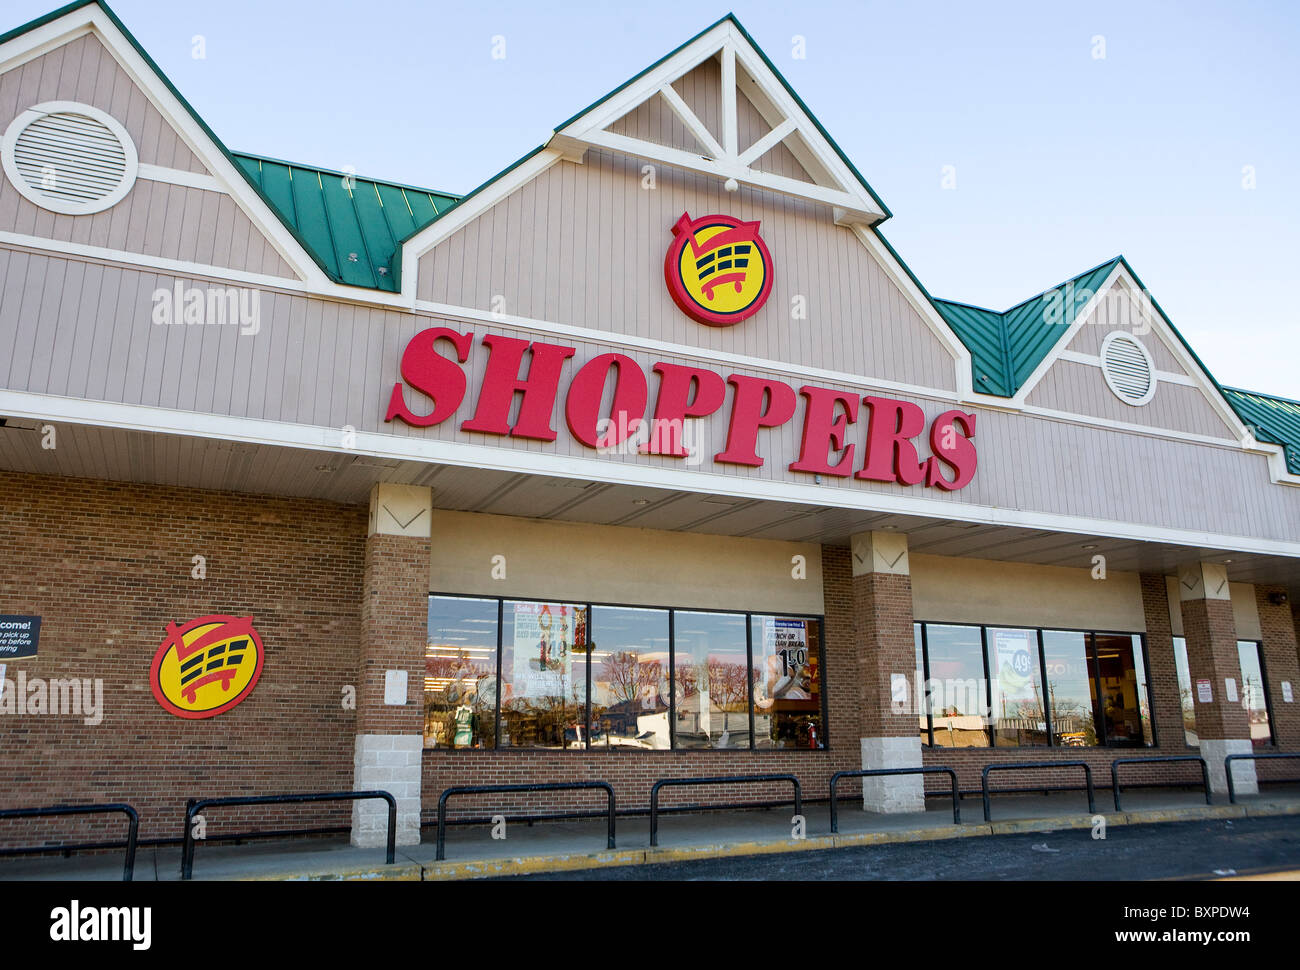 A Shoppers grocery store.  Stock Photo